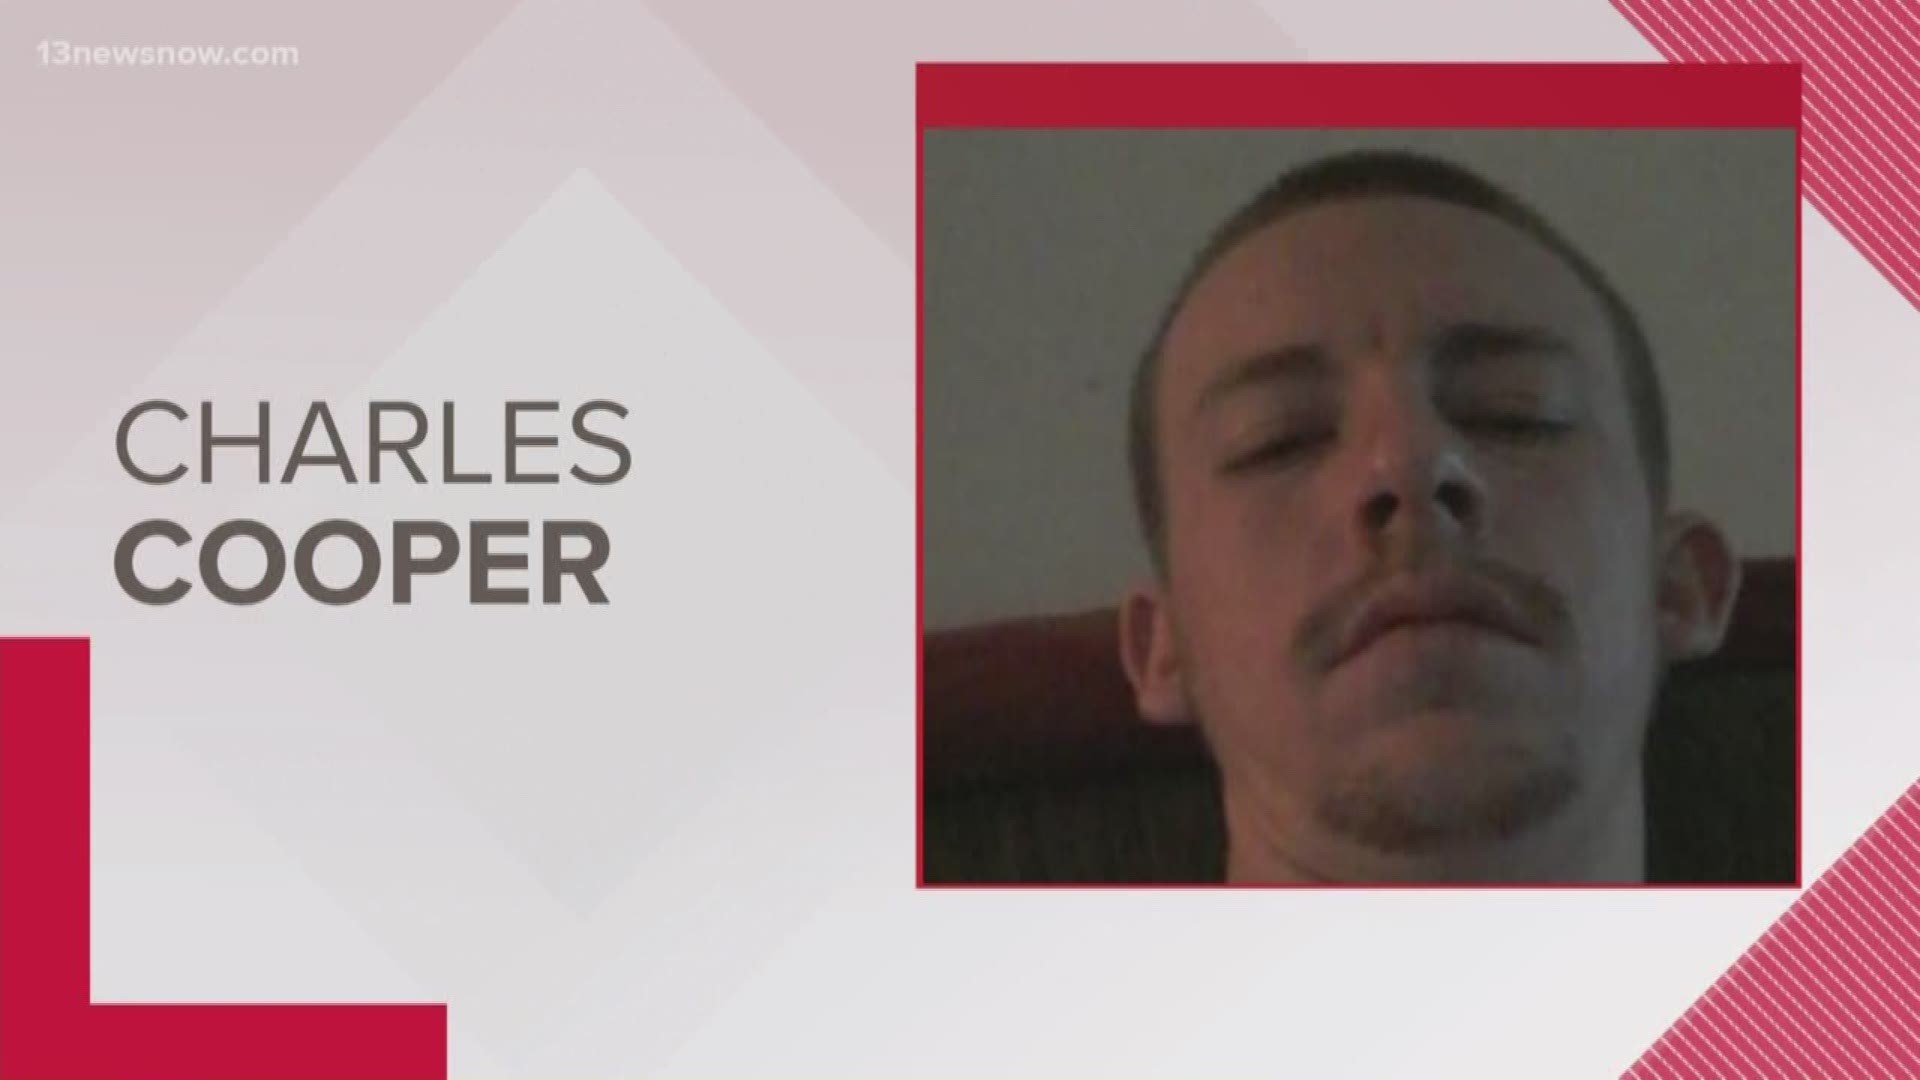 James City County police are looking for a man who is believed to be endangered.